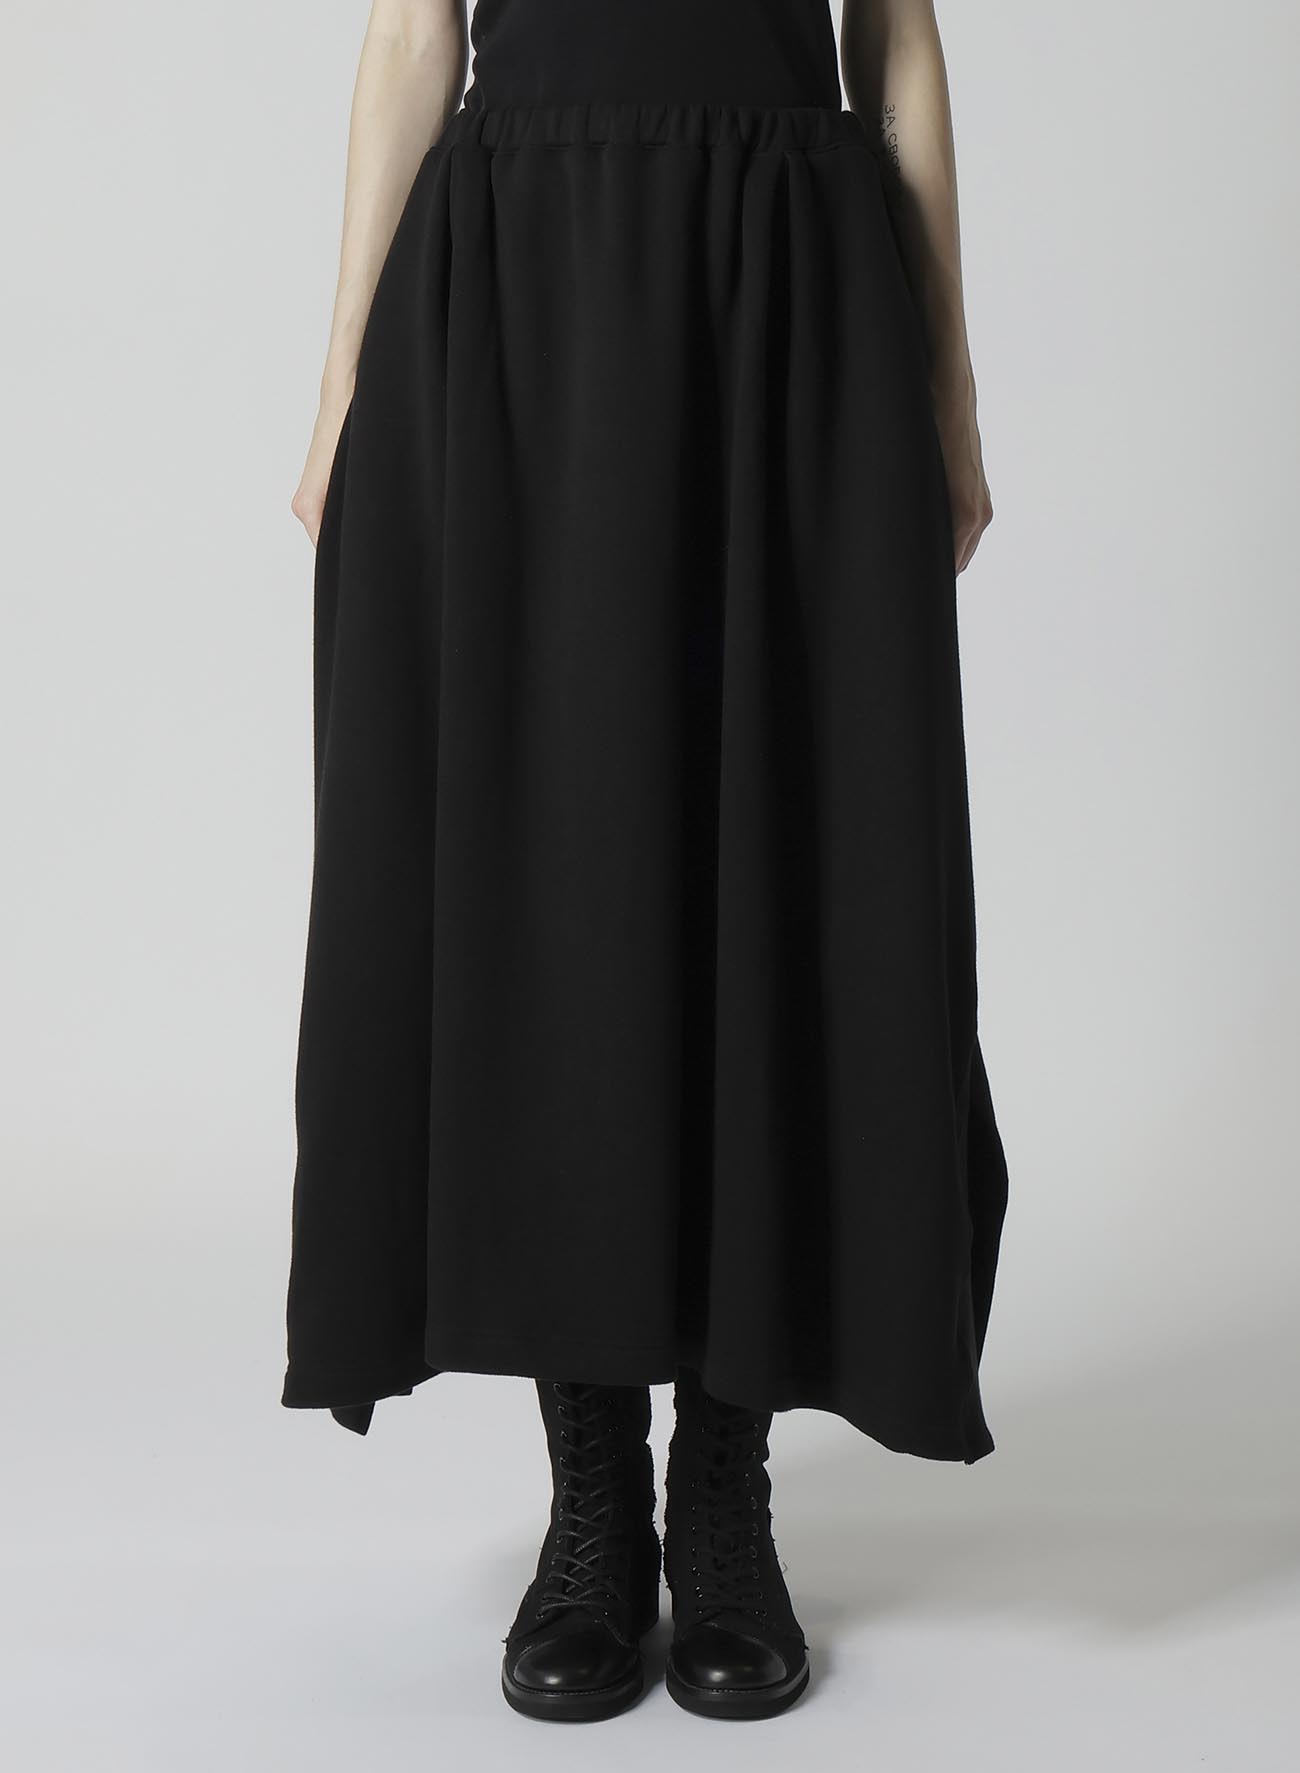 Liy/C FRENCH TERRY R-CUFF SKIRT